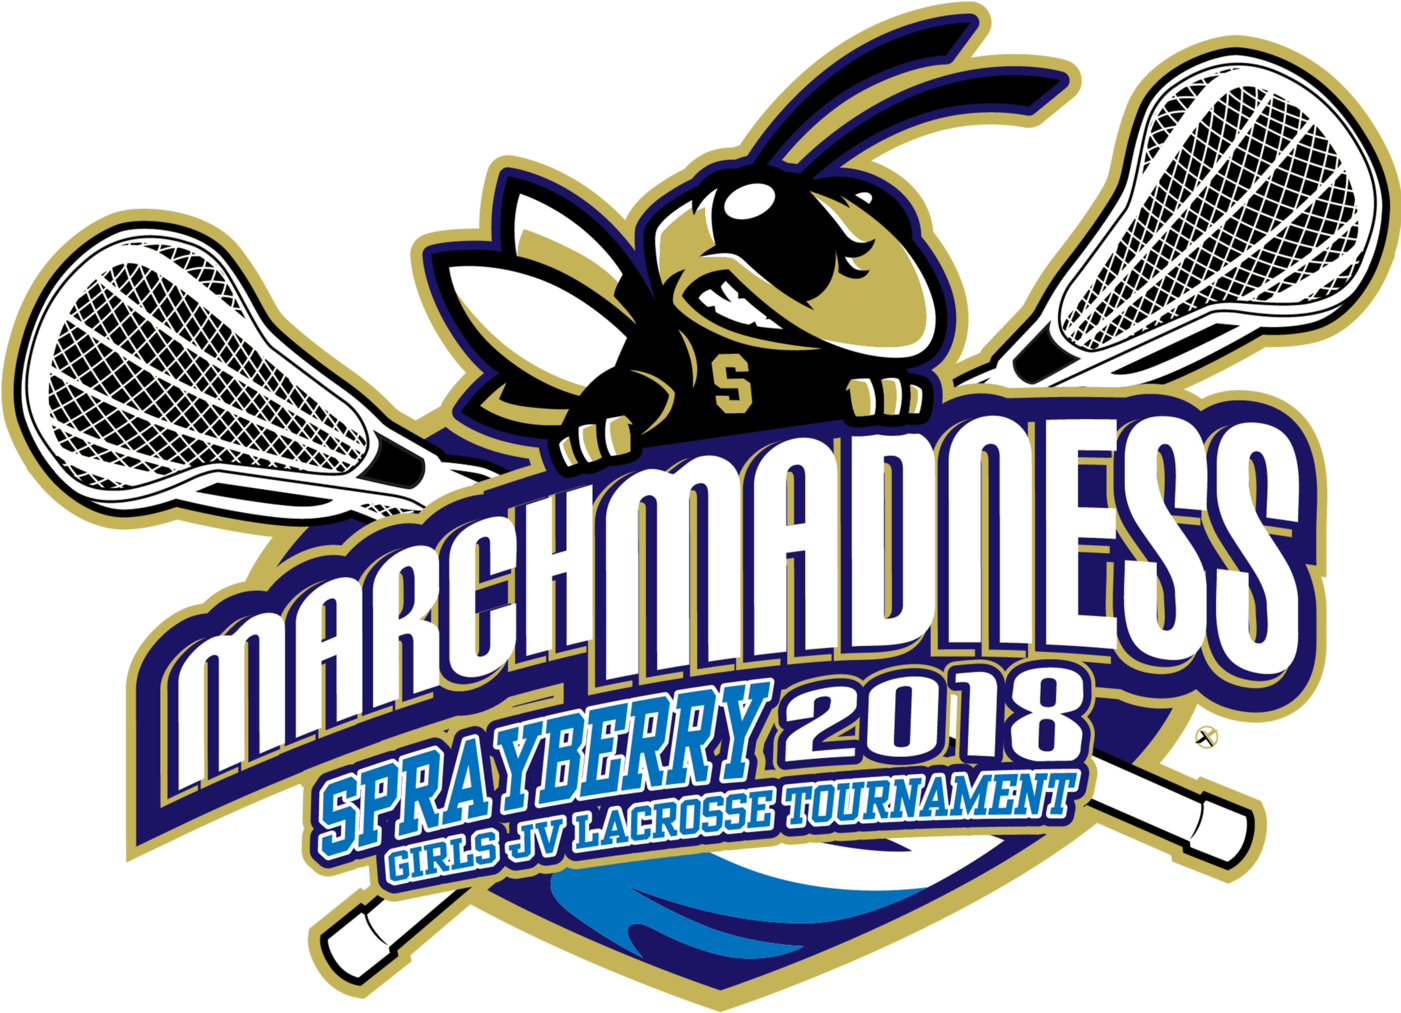 Download March Madness 18 Sprayberry Girls Jv Lacrosse Tournament Png Image With No Background Pngkey Com